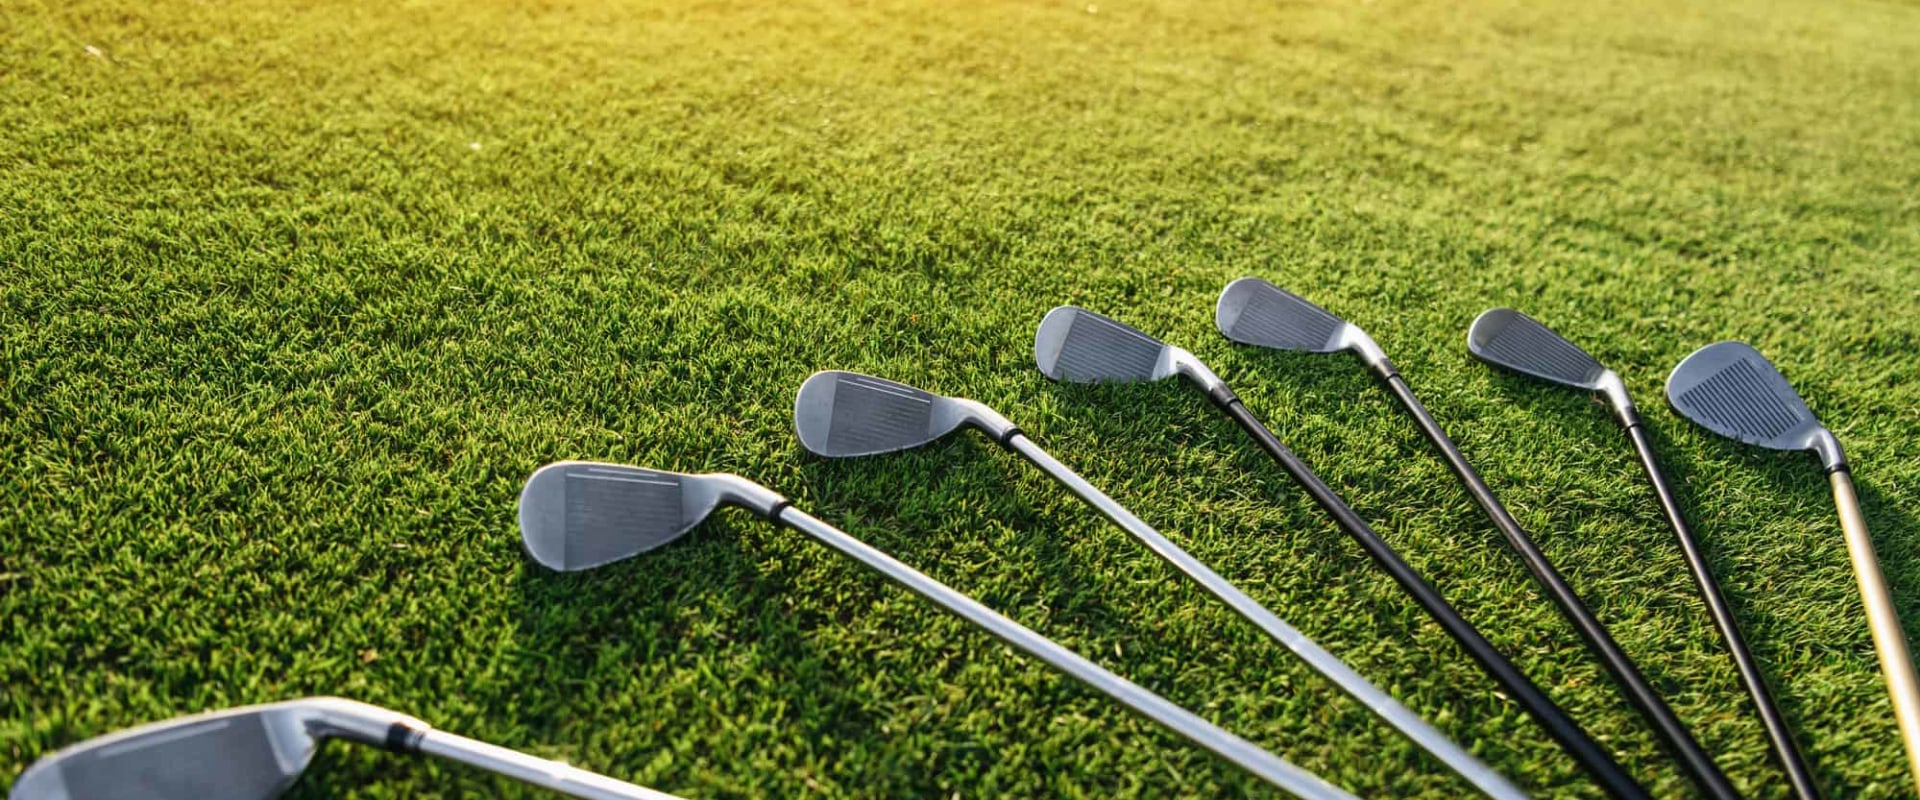 How often should you replace golf irons?